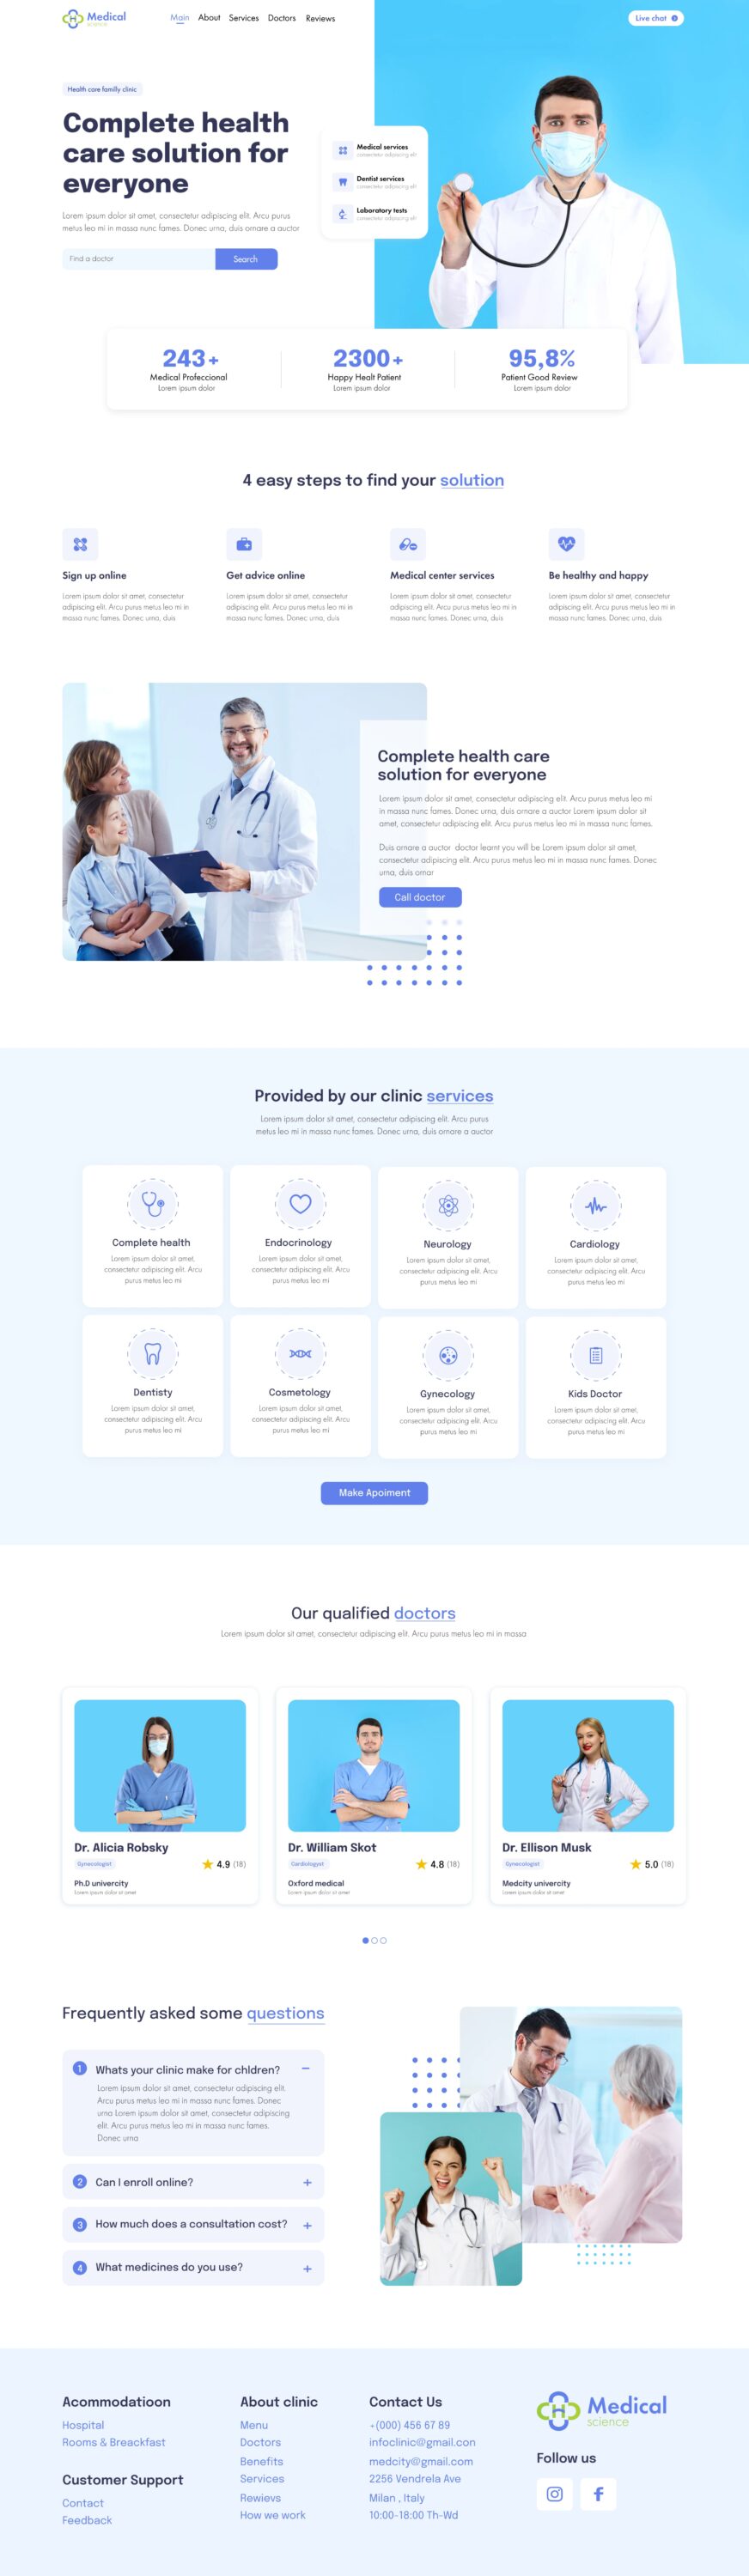 Blue page for healthcare industry.